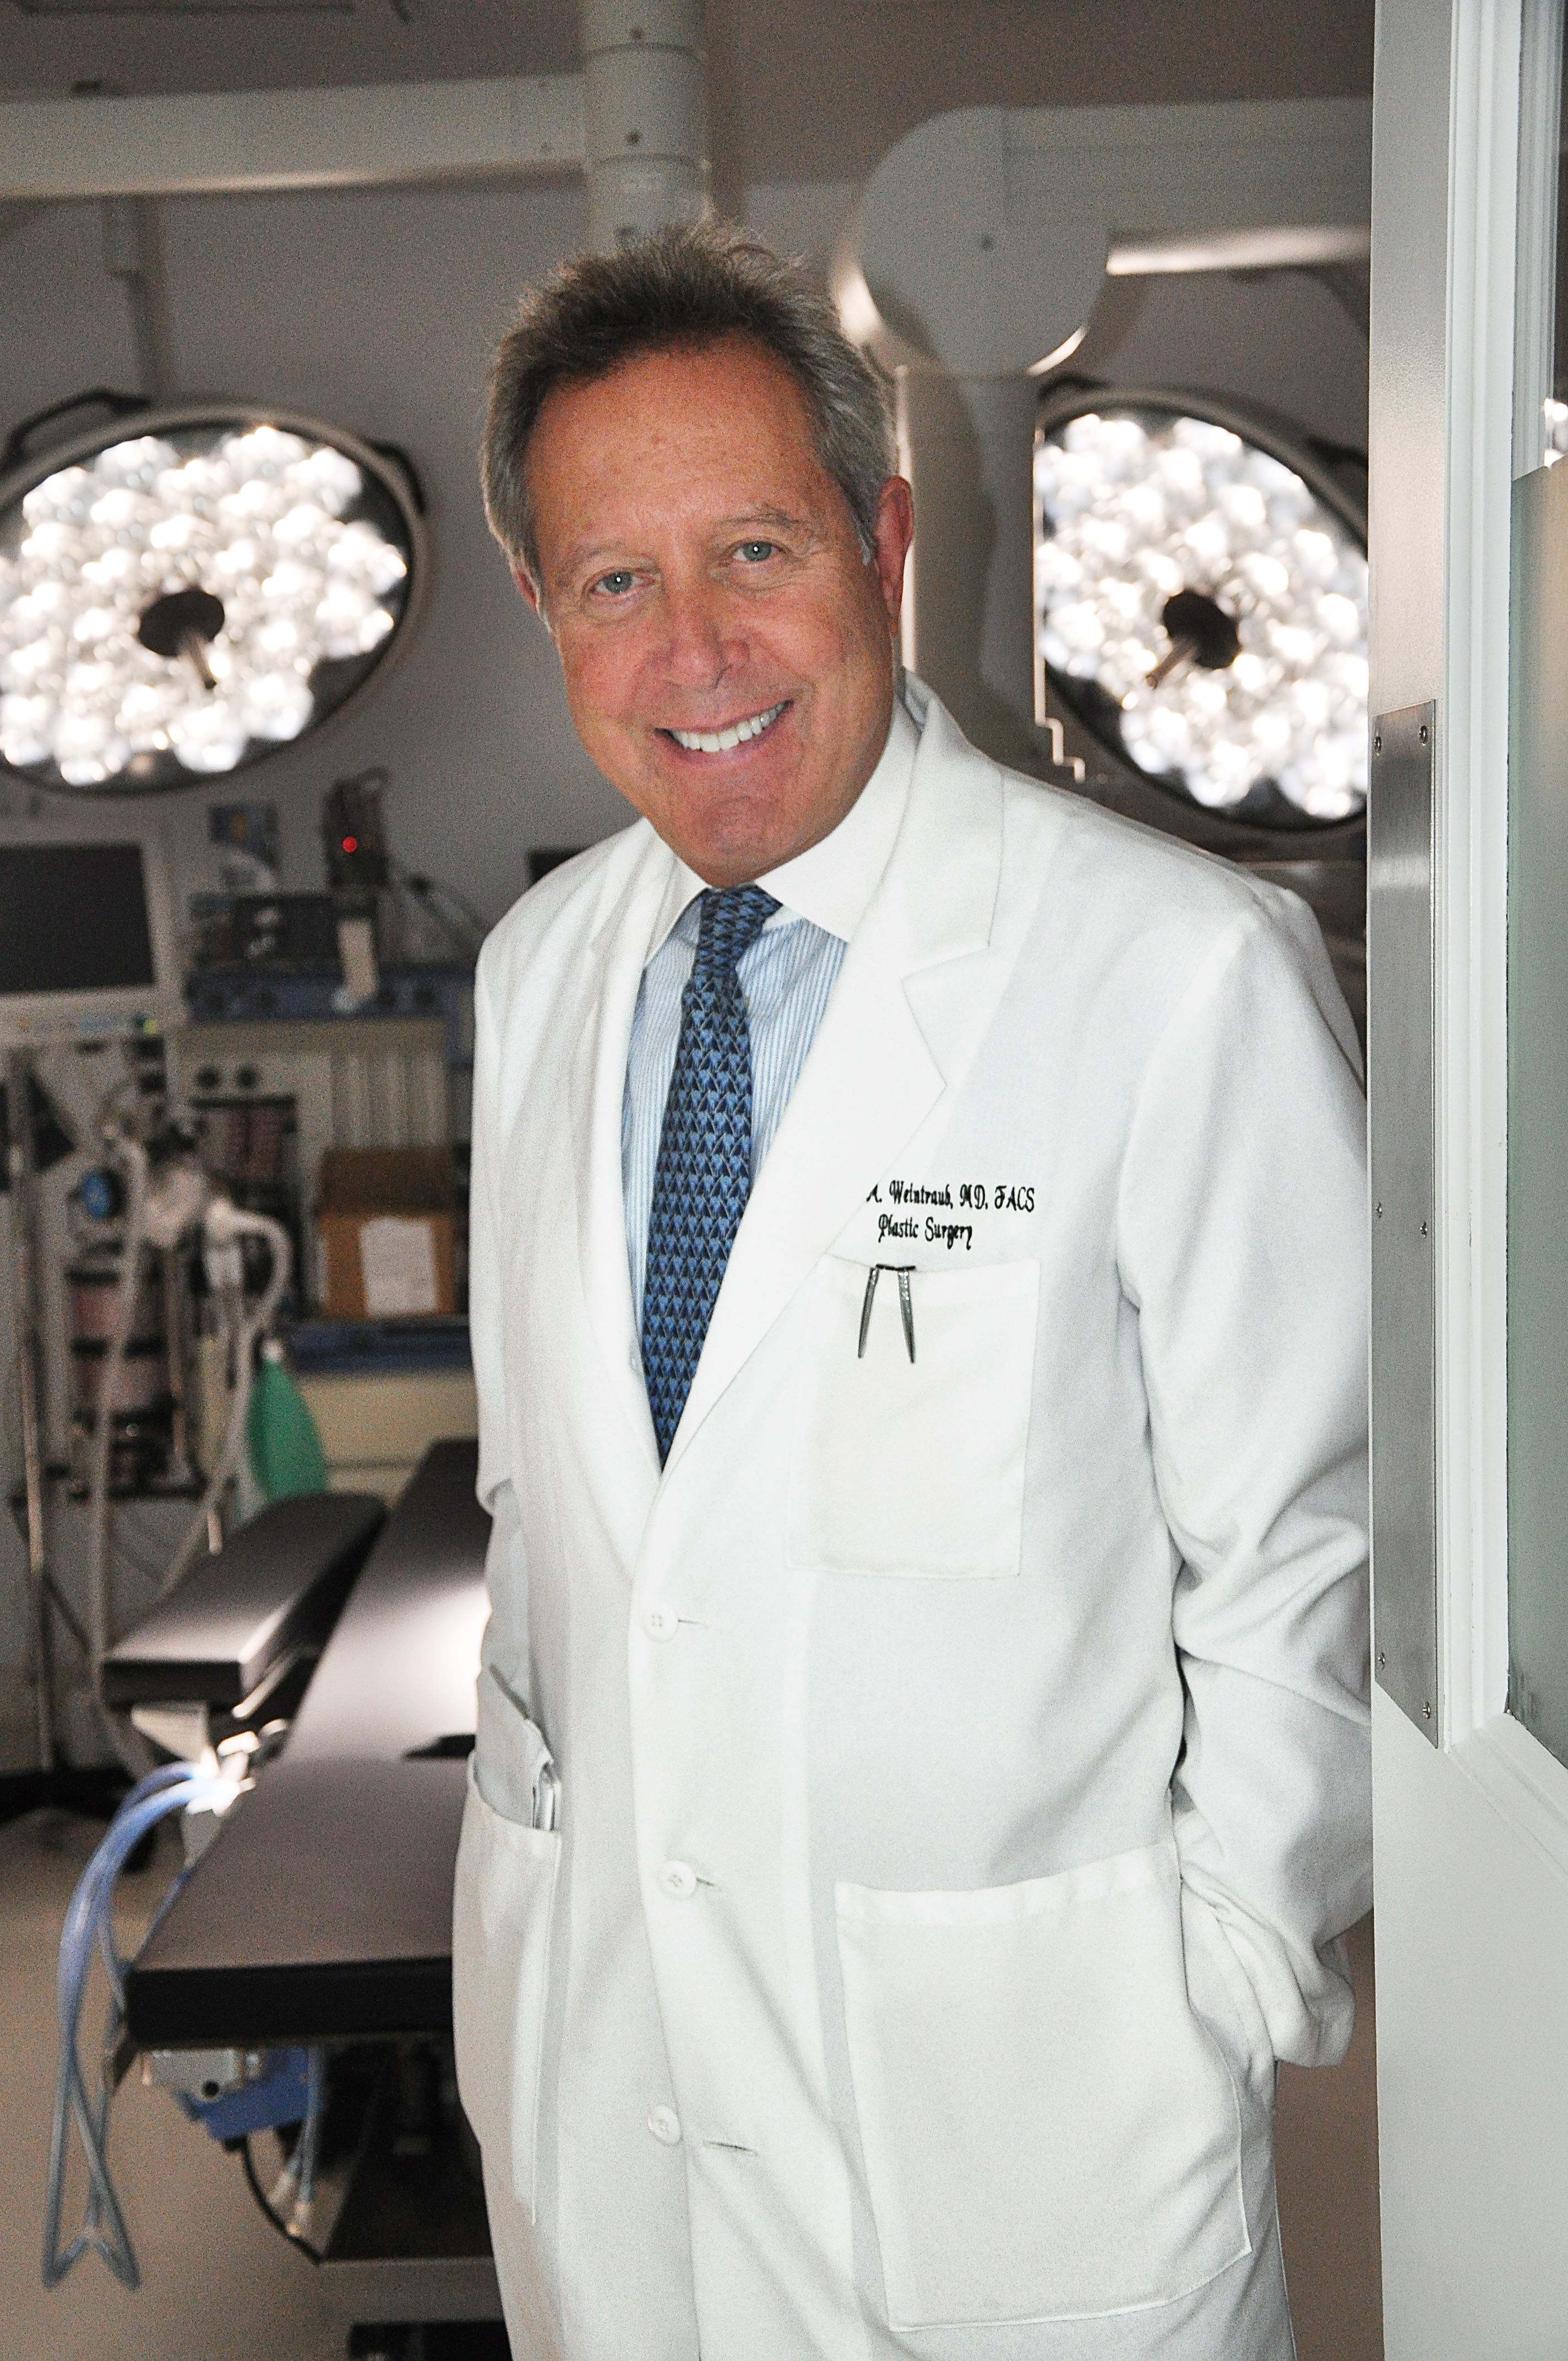 New York Plastic Surgeon Now Offering Patients Five Newest